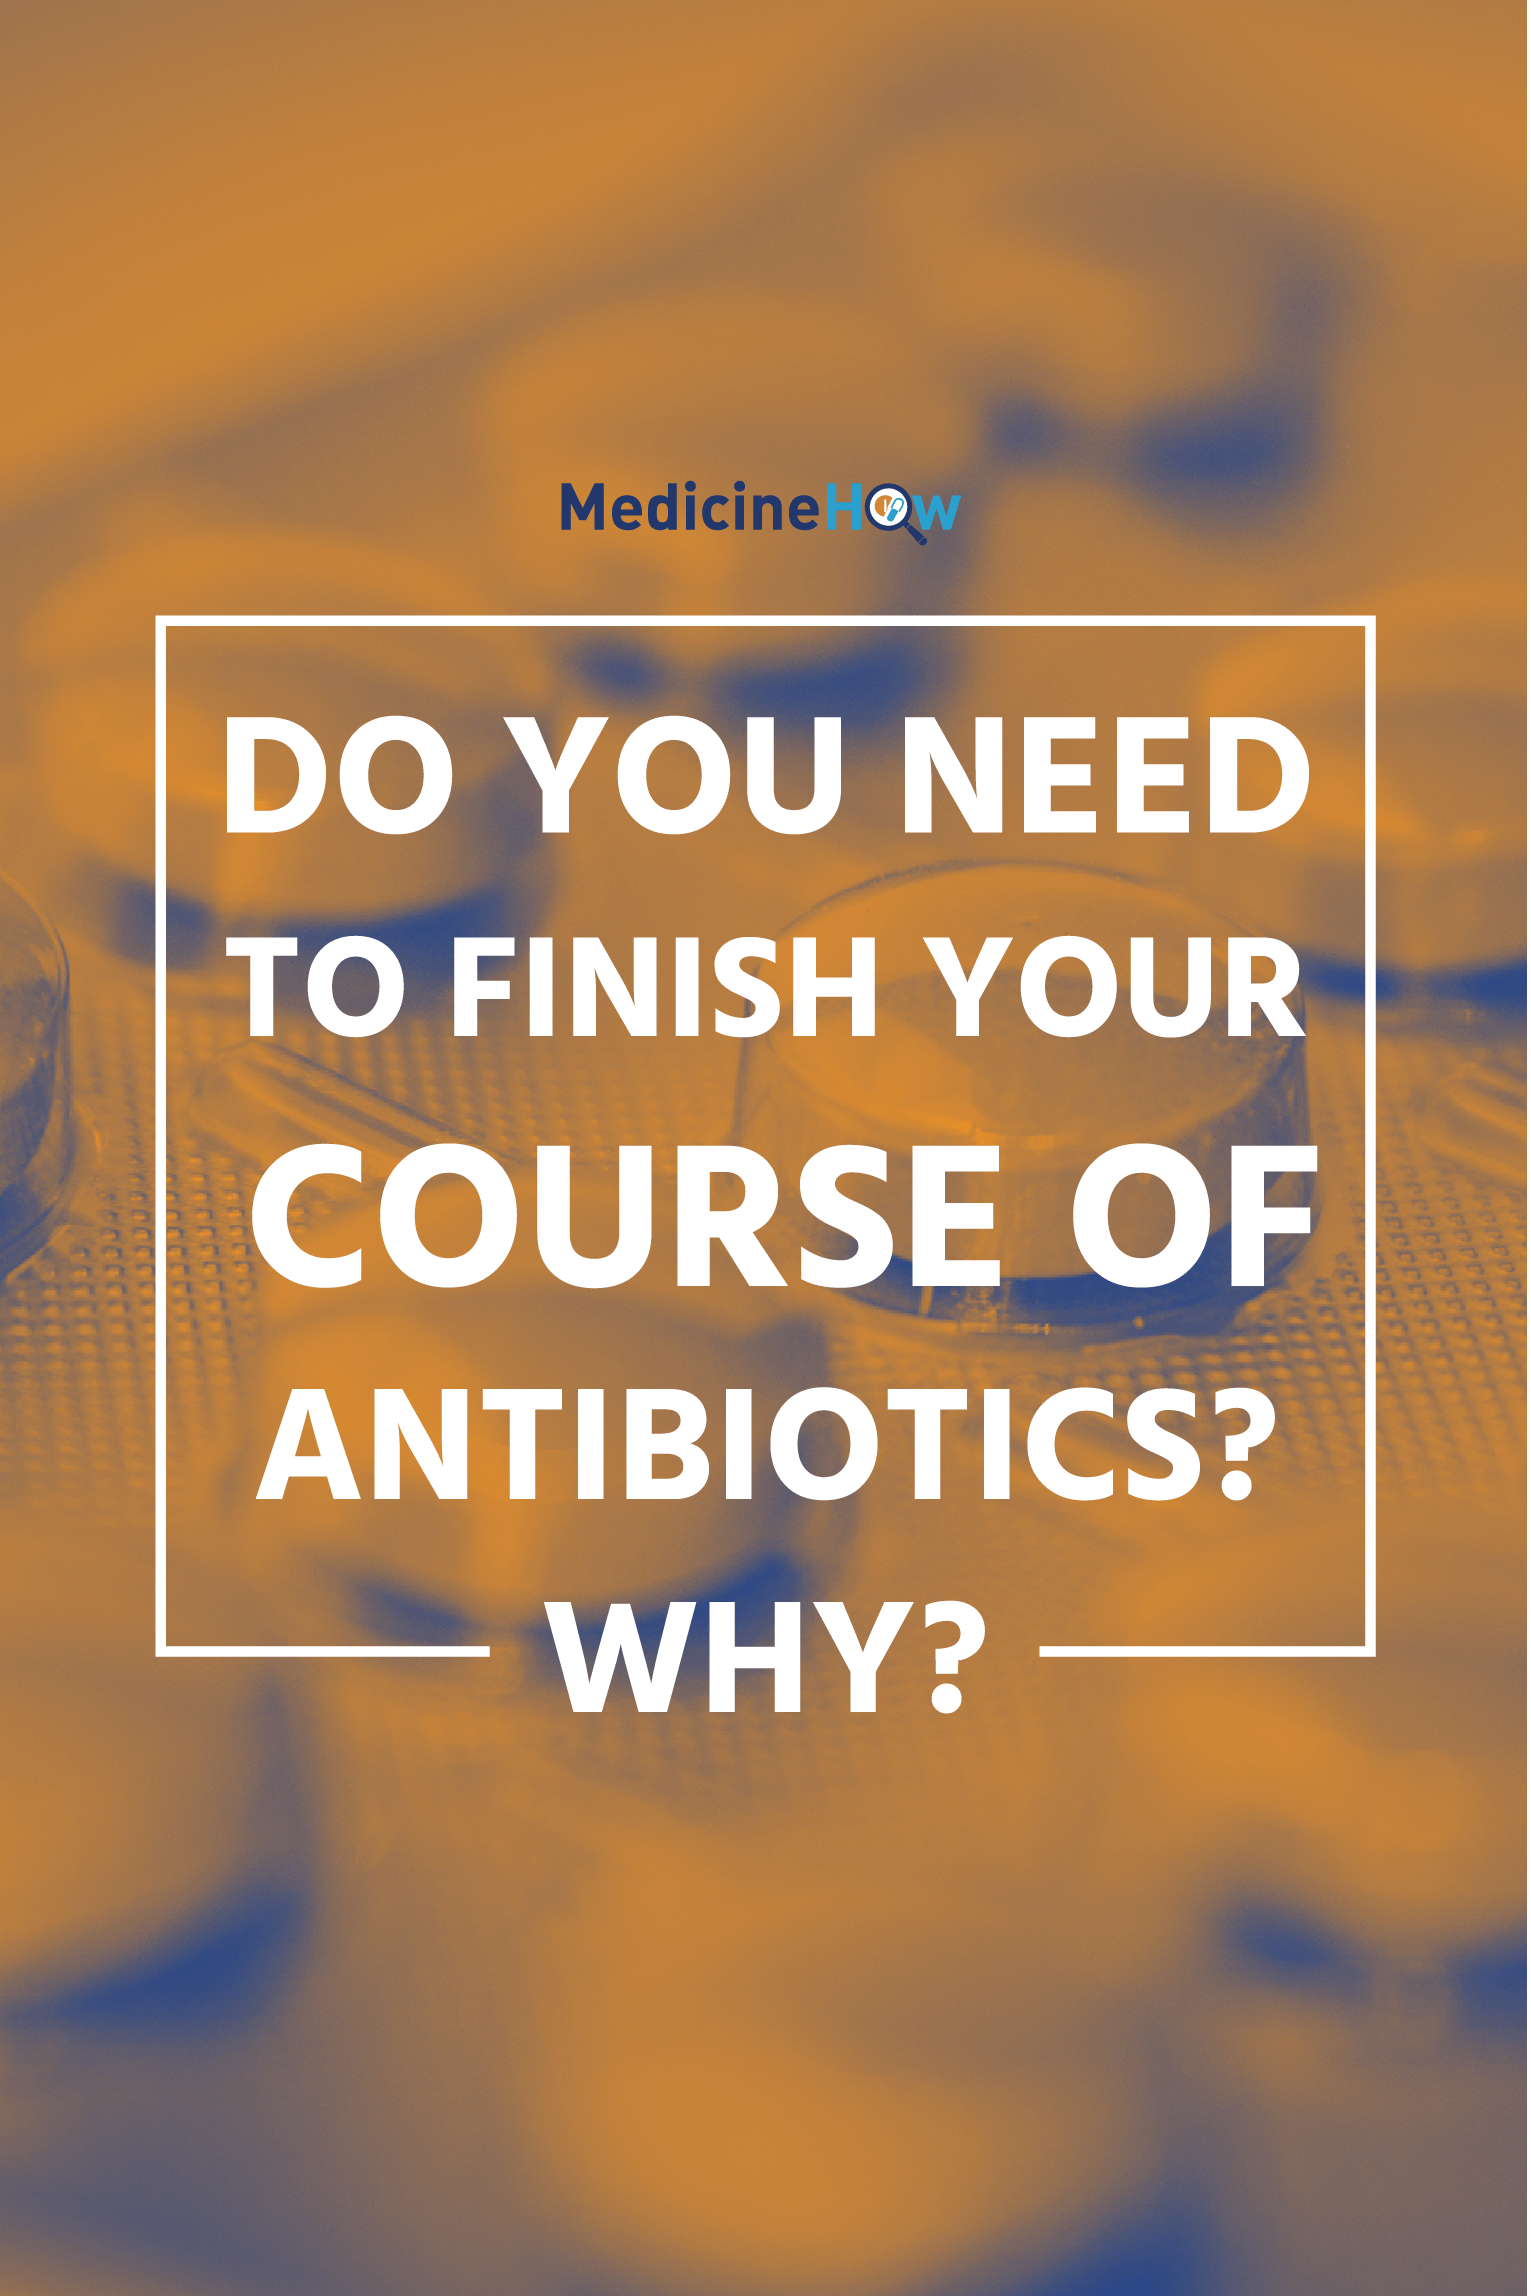 Why you should finish the course of antibiotics | Have you ever wondered just why we are told to finish the course of antibiotics? Turns out there is a valid reason, more than one in fact. Click through to read more about why.